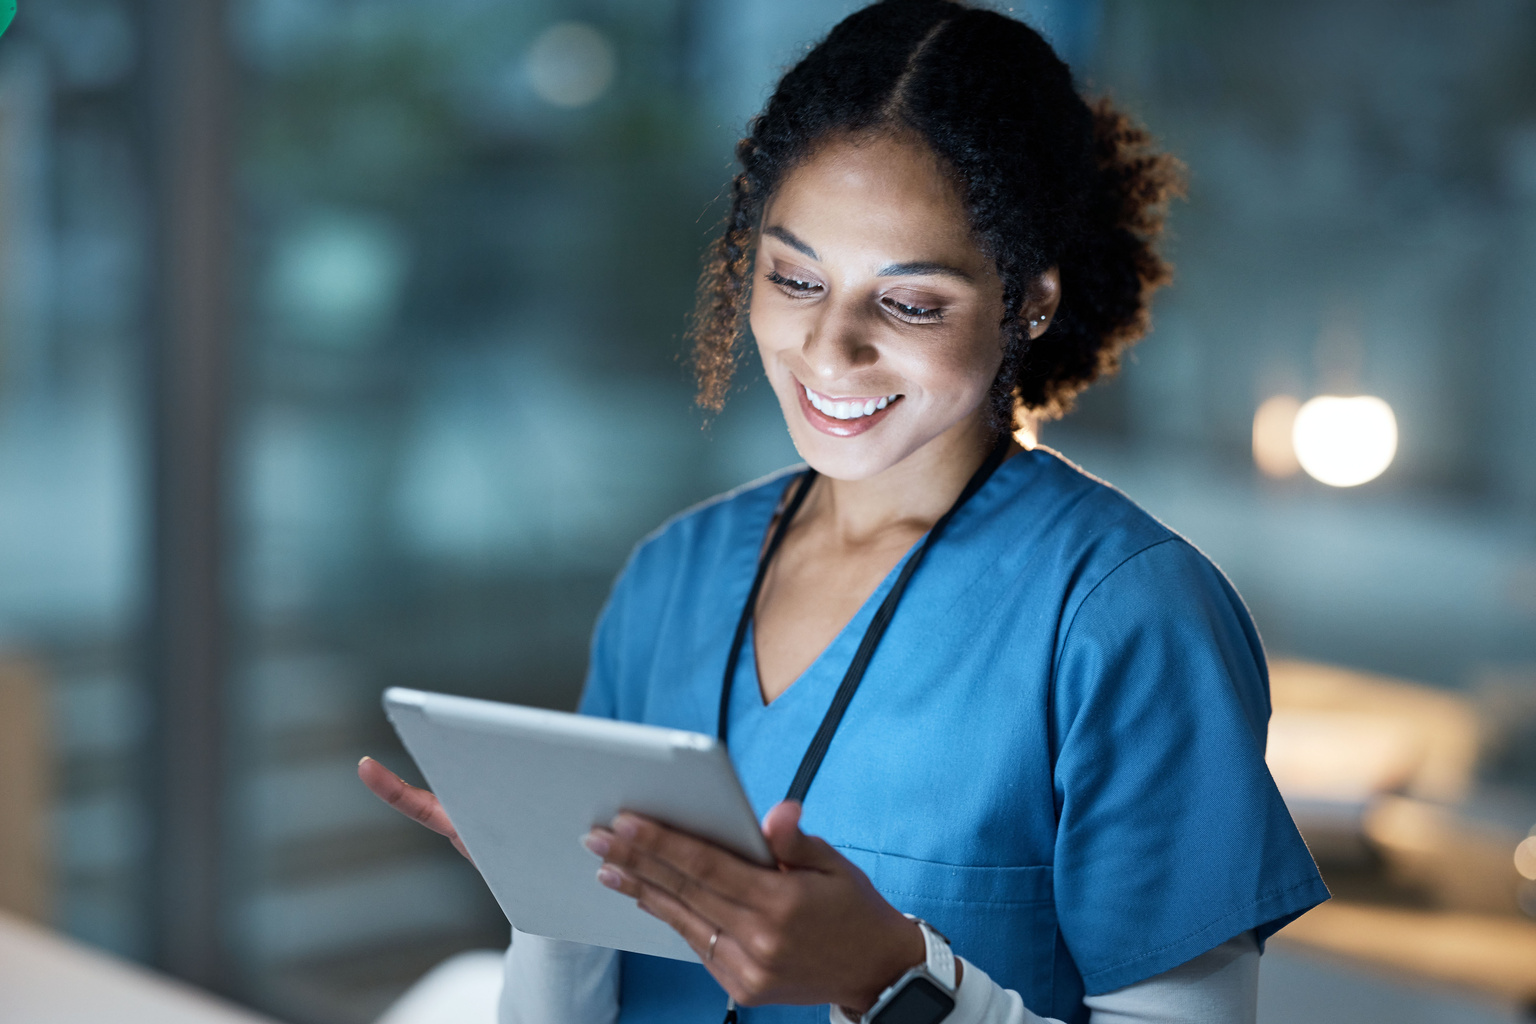 Female nurse wearing blue scubs in a dark room reading information from a tablet